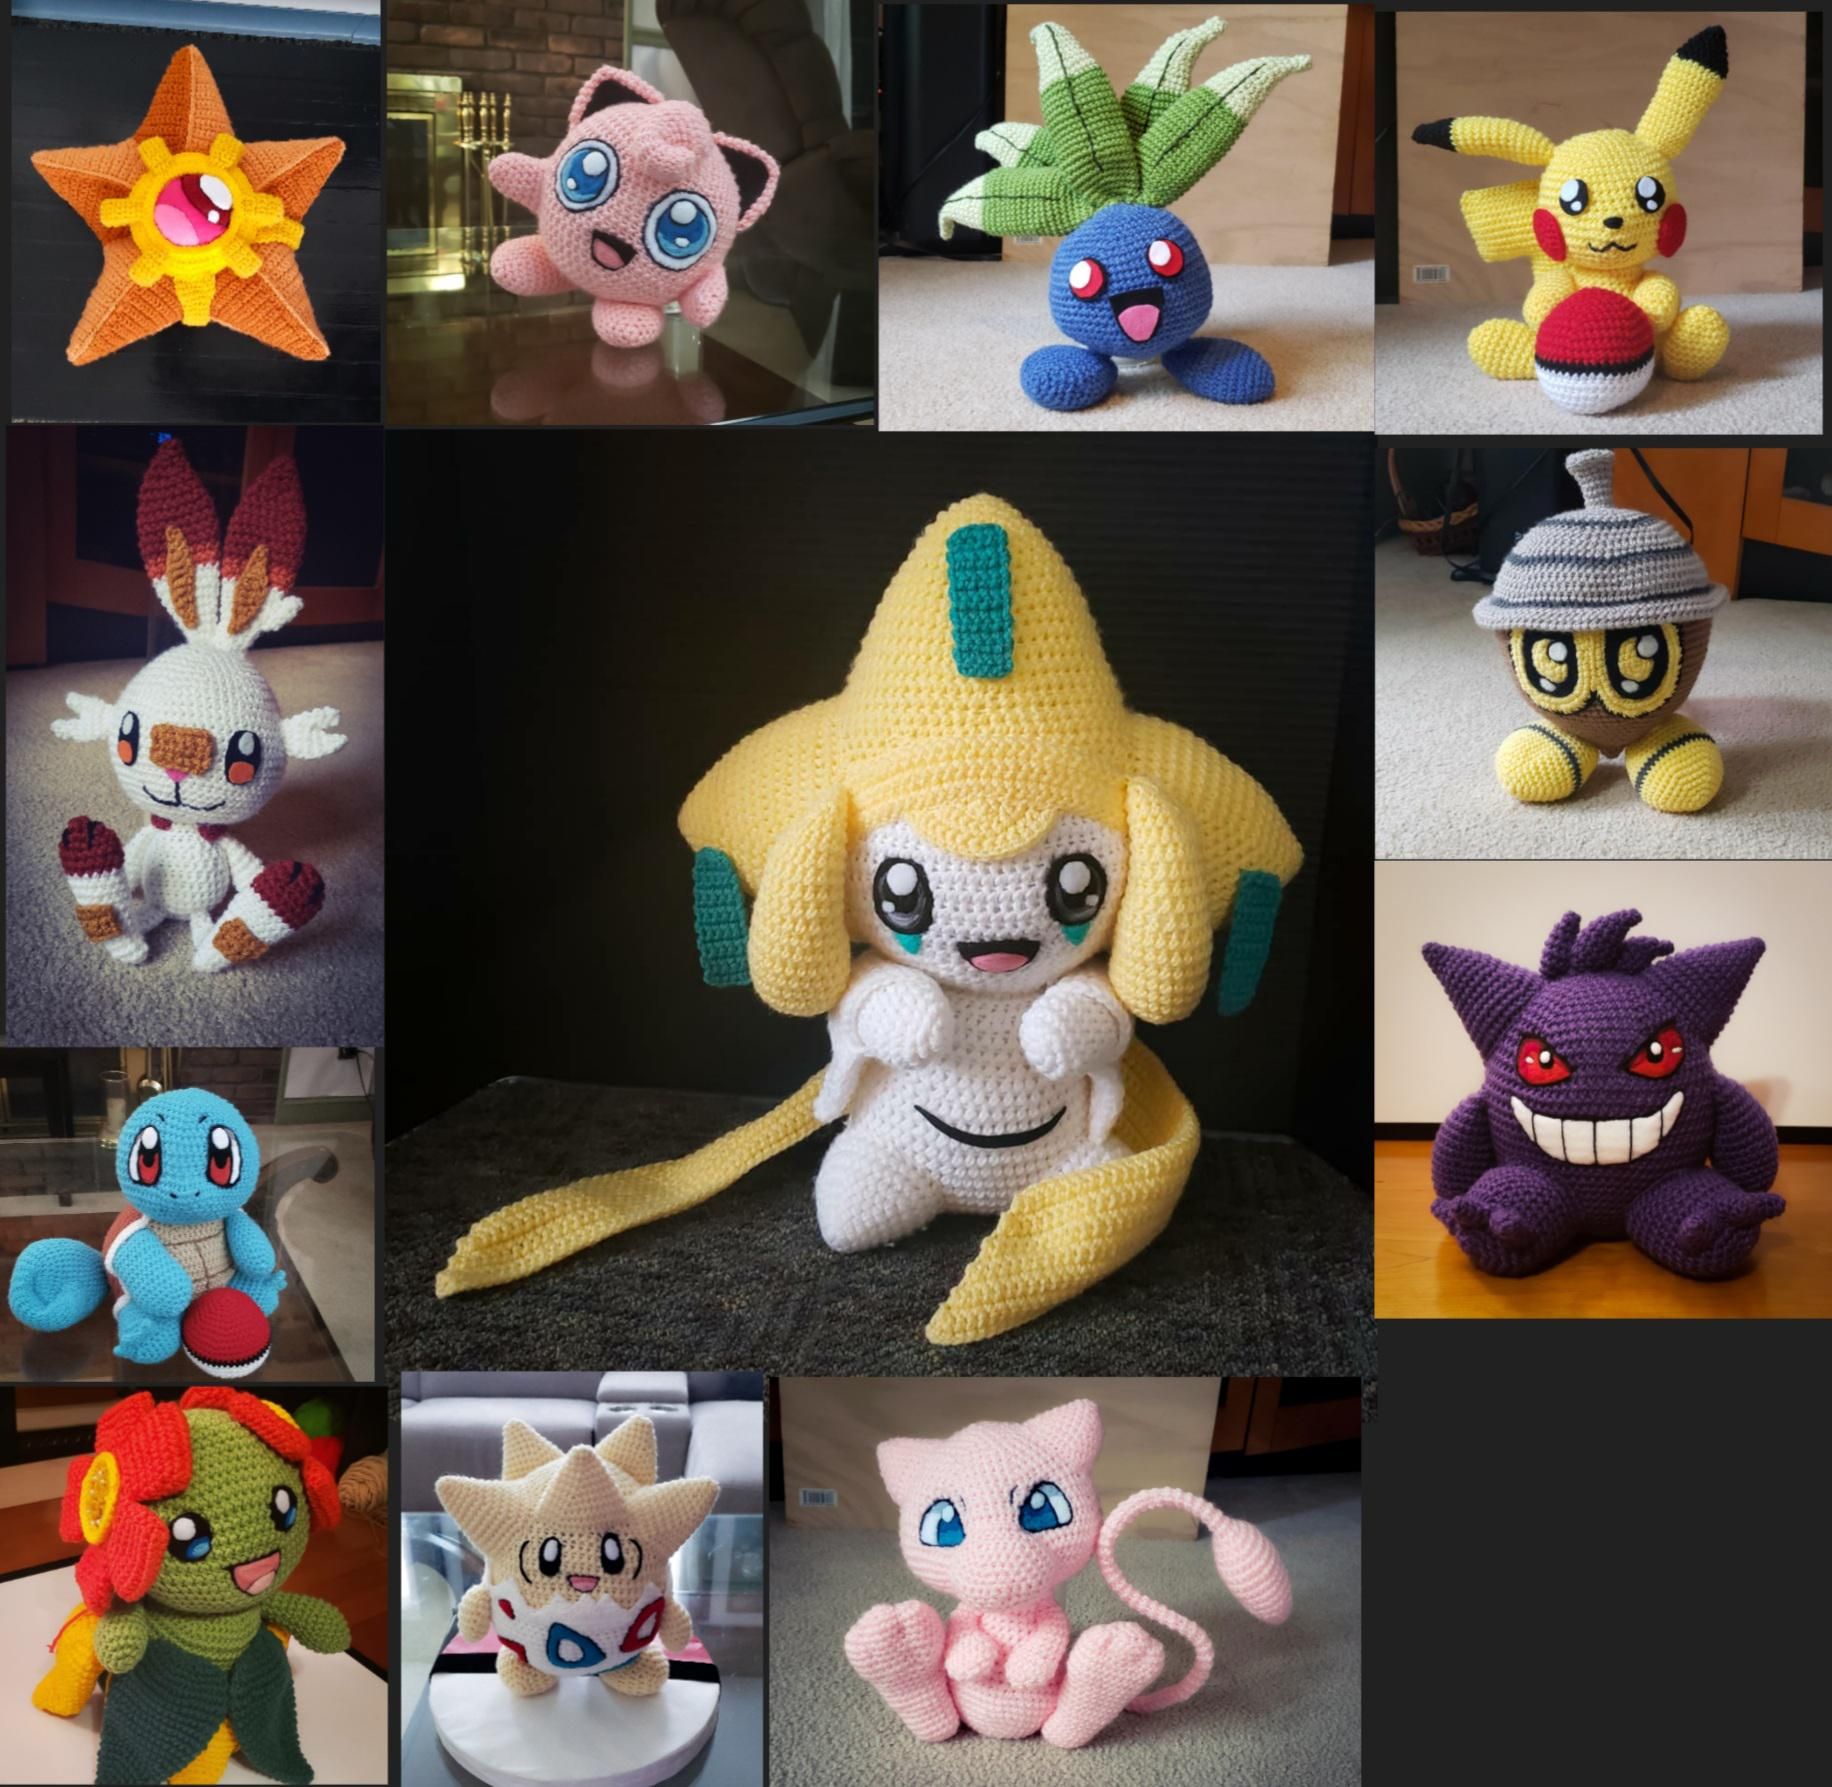 I'm crocheting every Pokémon. This is the squad so far.